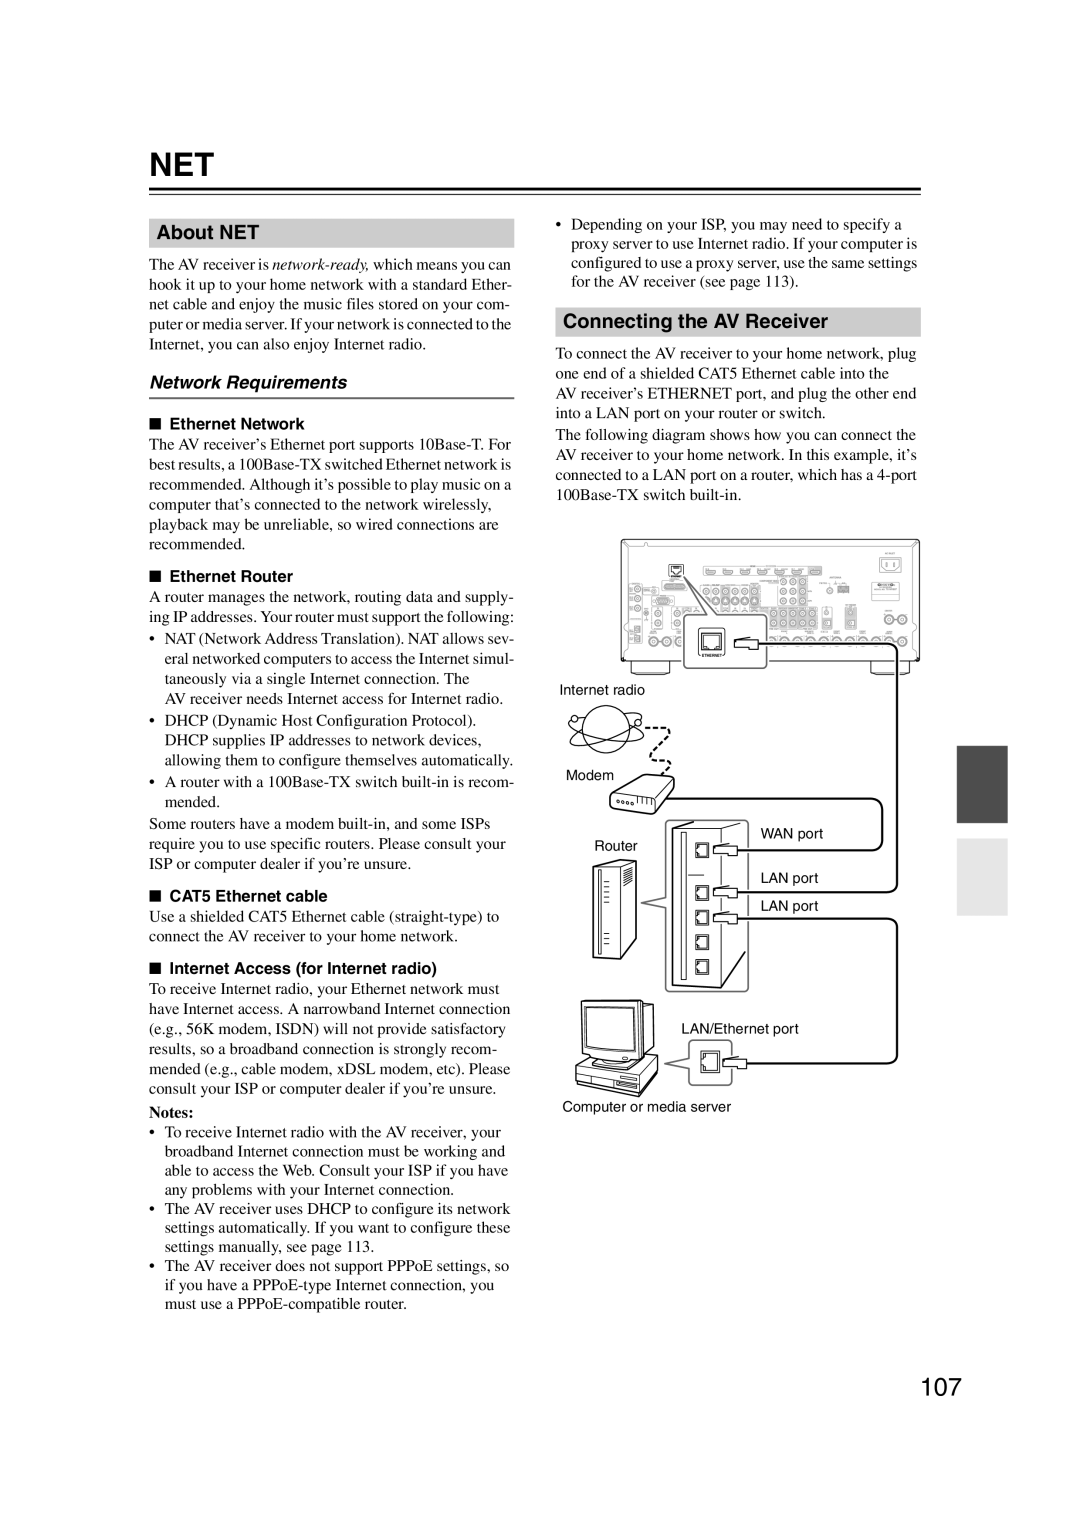 Onkyo TX-NR807, 29400021, HT-RC180 instruction manual About NET, Connecting the AV Receiver, Network Requirements, Notes 